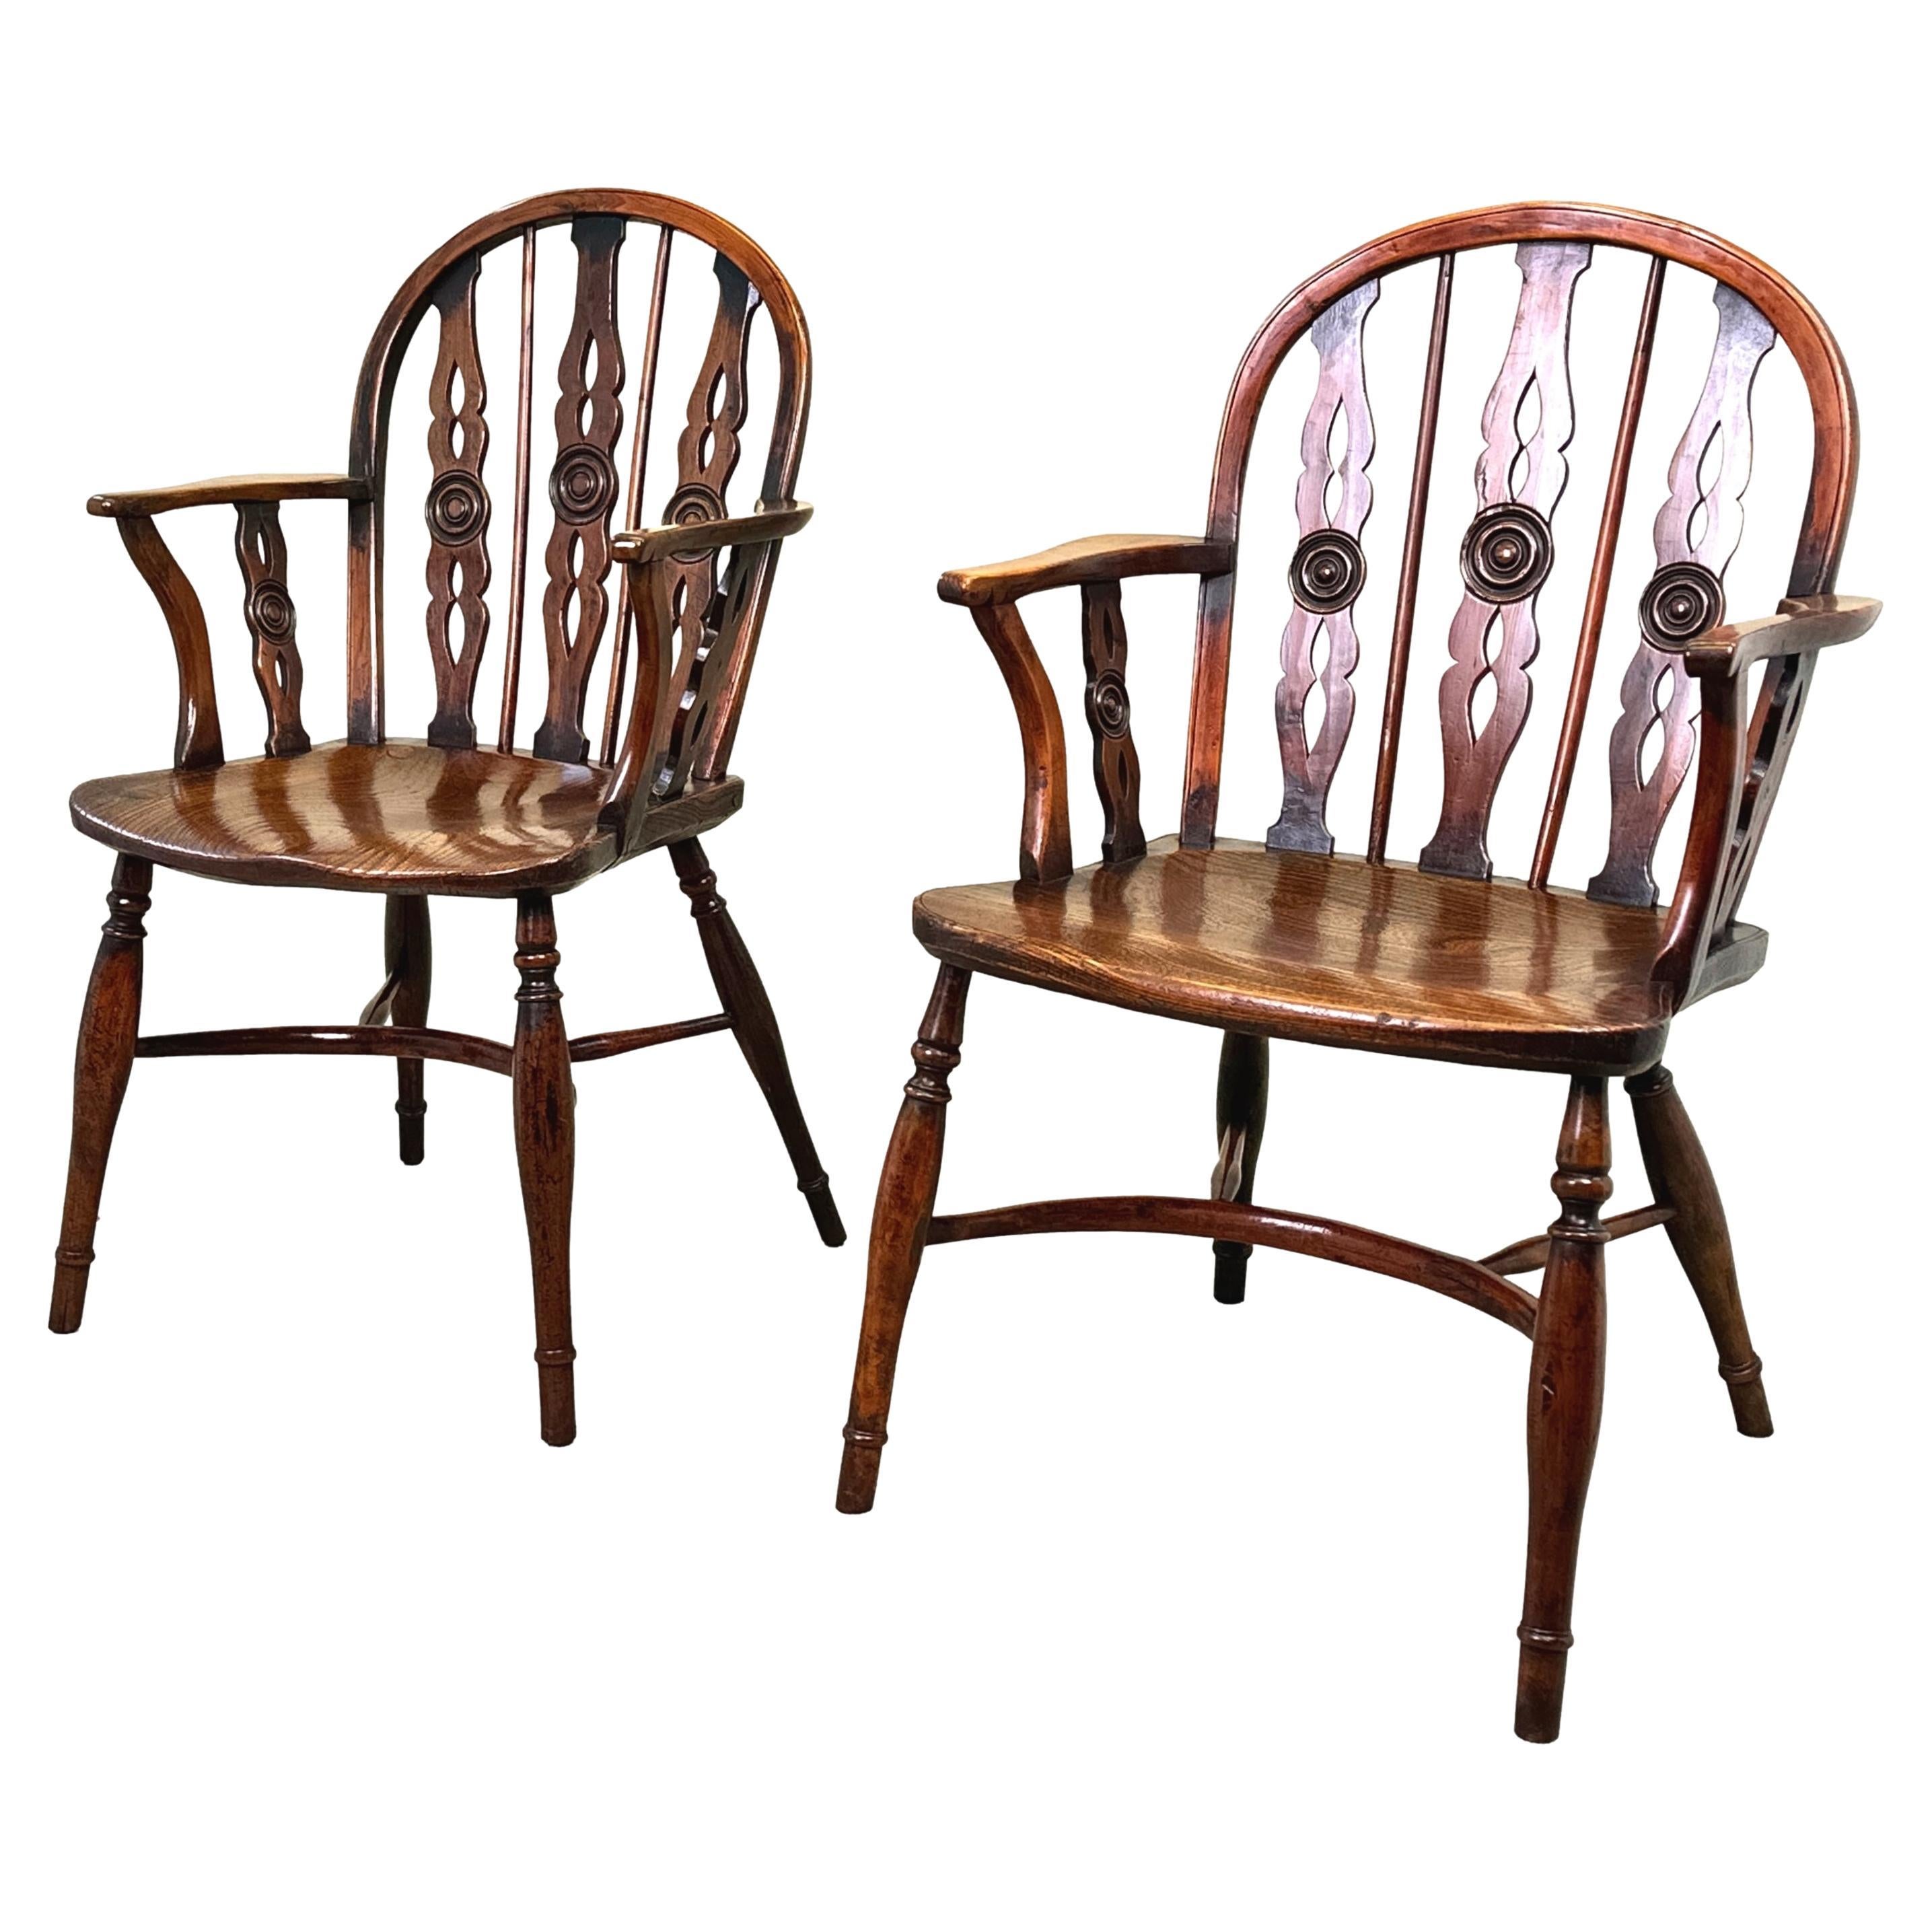 Yew Wood Pair Of 19th Century Windsor Armchairs For Sale